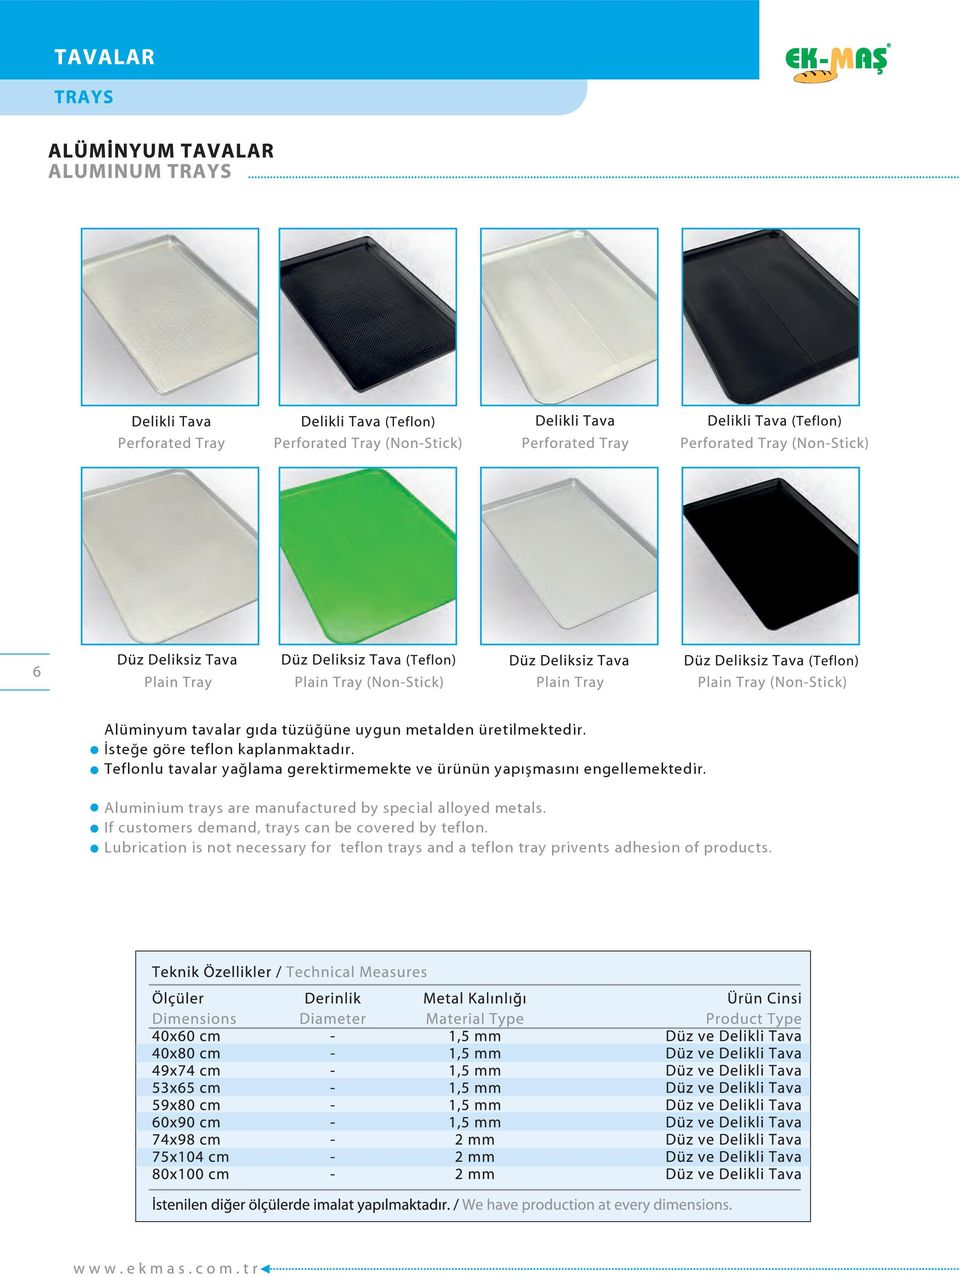 Aluminium trays are manufactured by special alloyed metals.